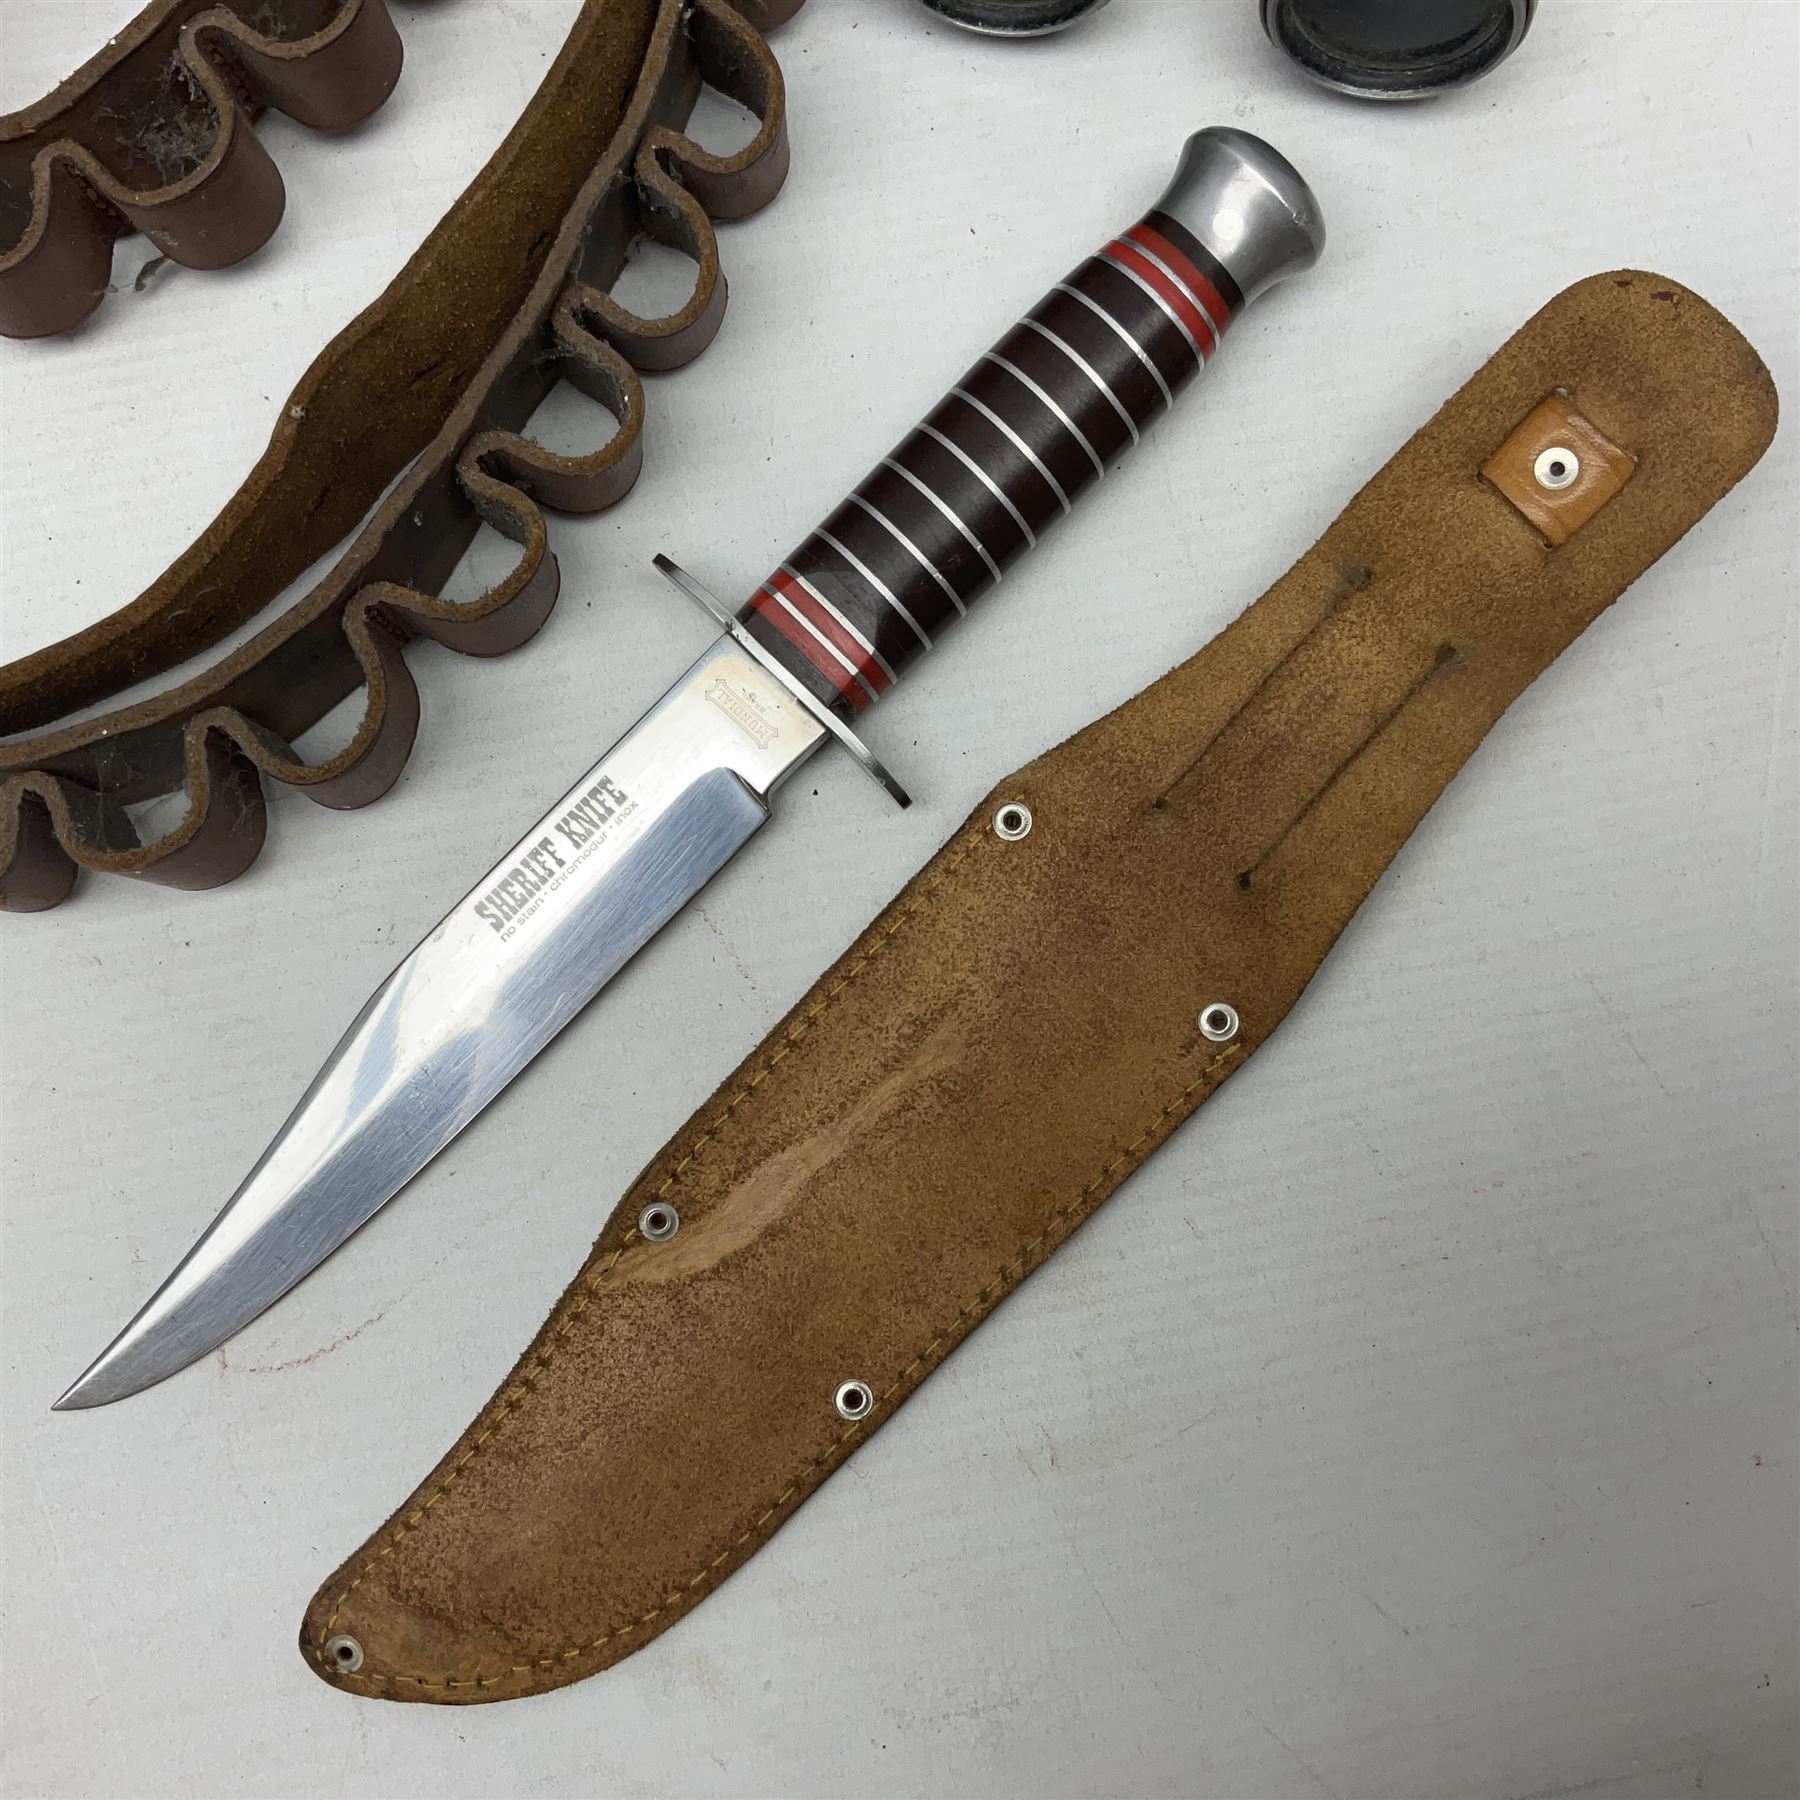 Mundial Brazil bowie knife - Image 6 of 21